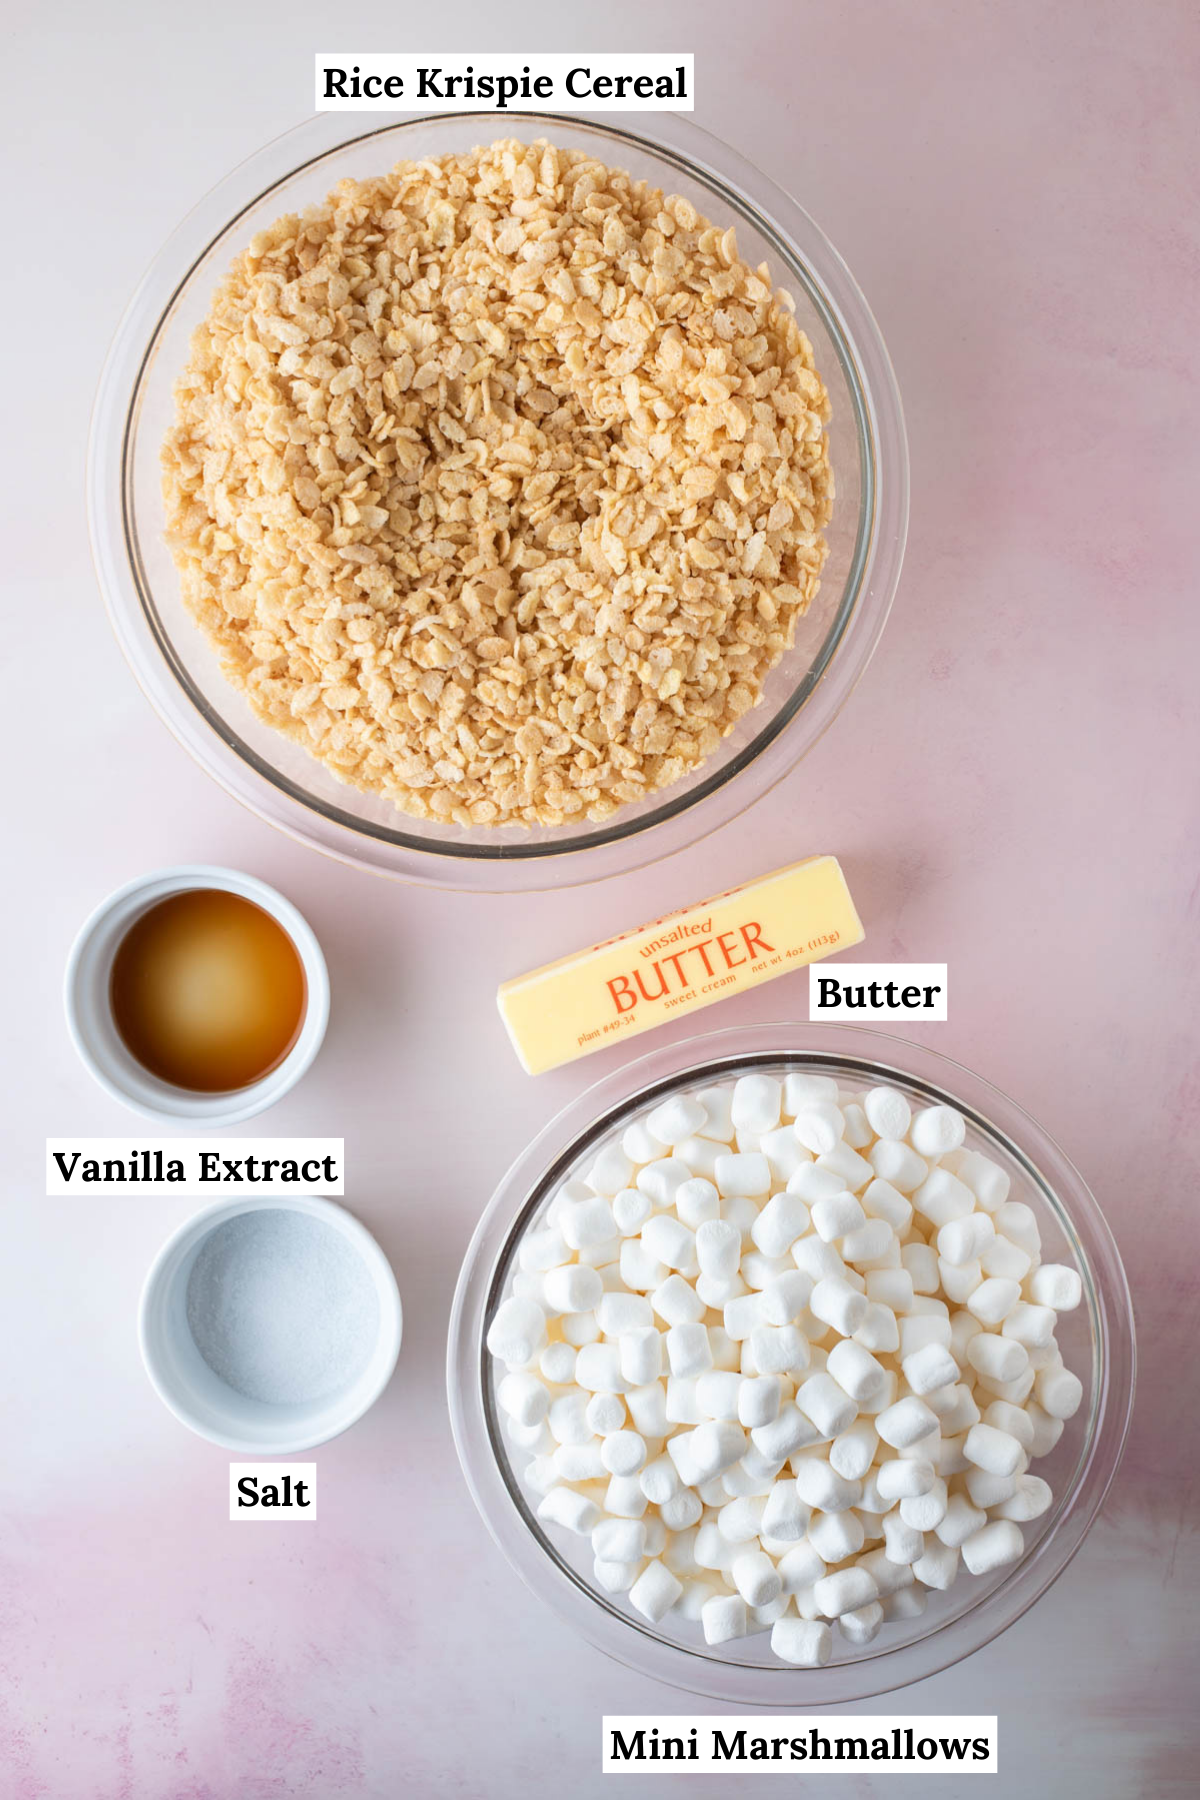 ingredients for rice krispie treats including vanilla extract, butter, salt, mini marshmallows and rice krispie treats